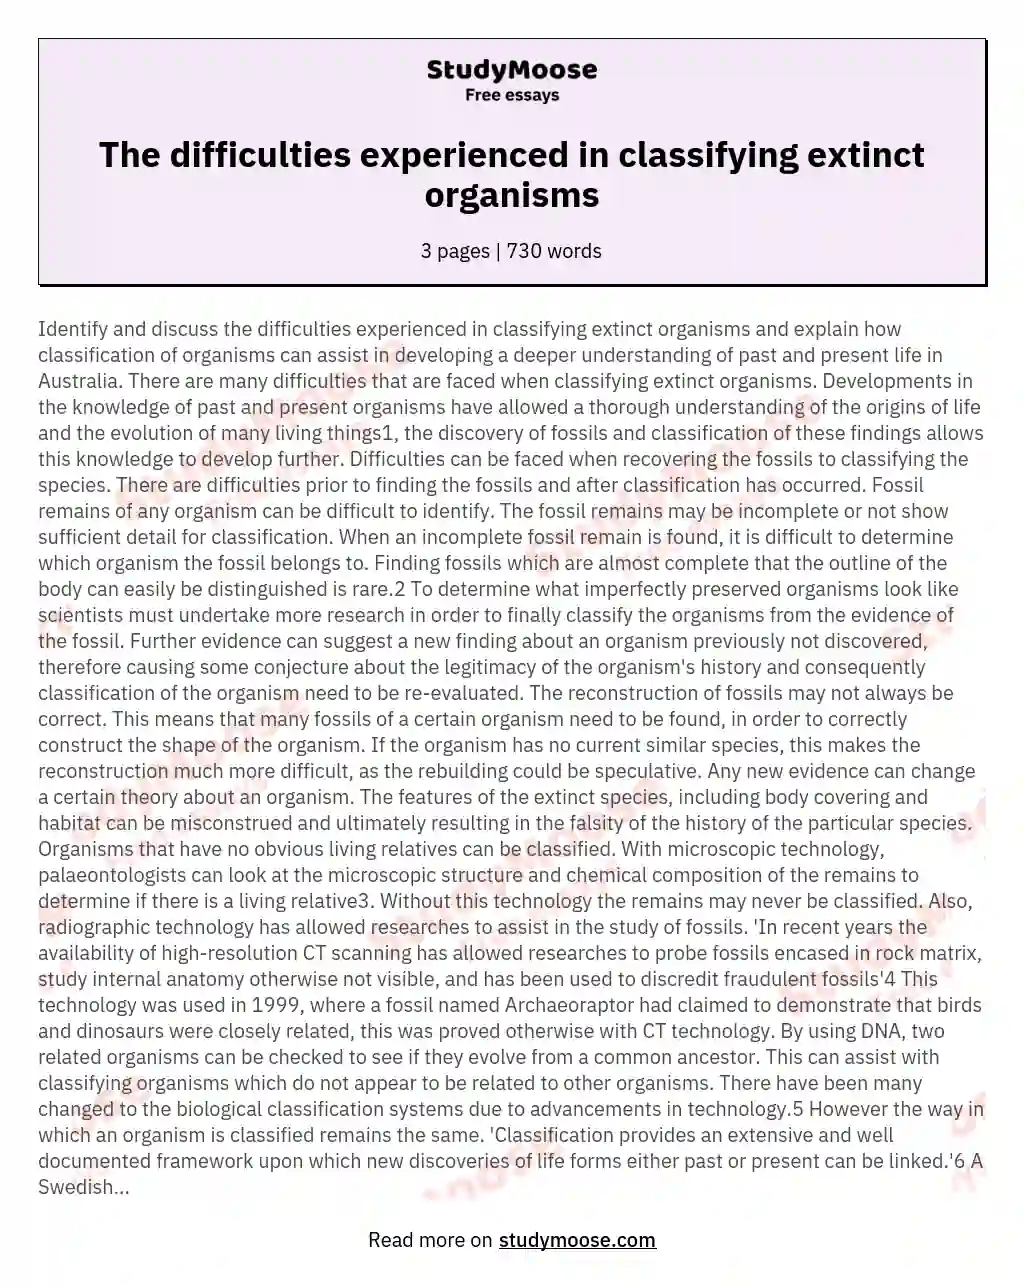 The difficulties experienced in classifying extinct organisms